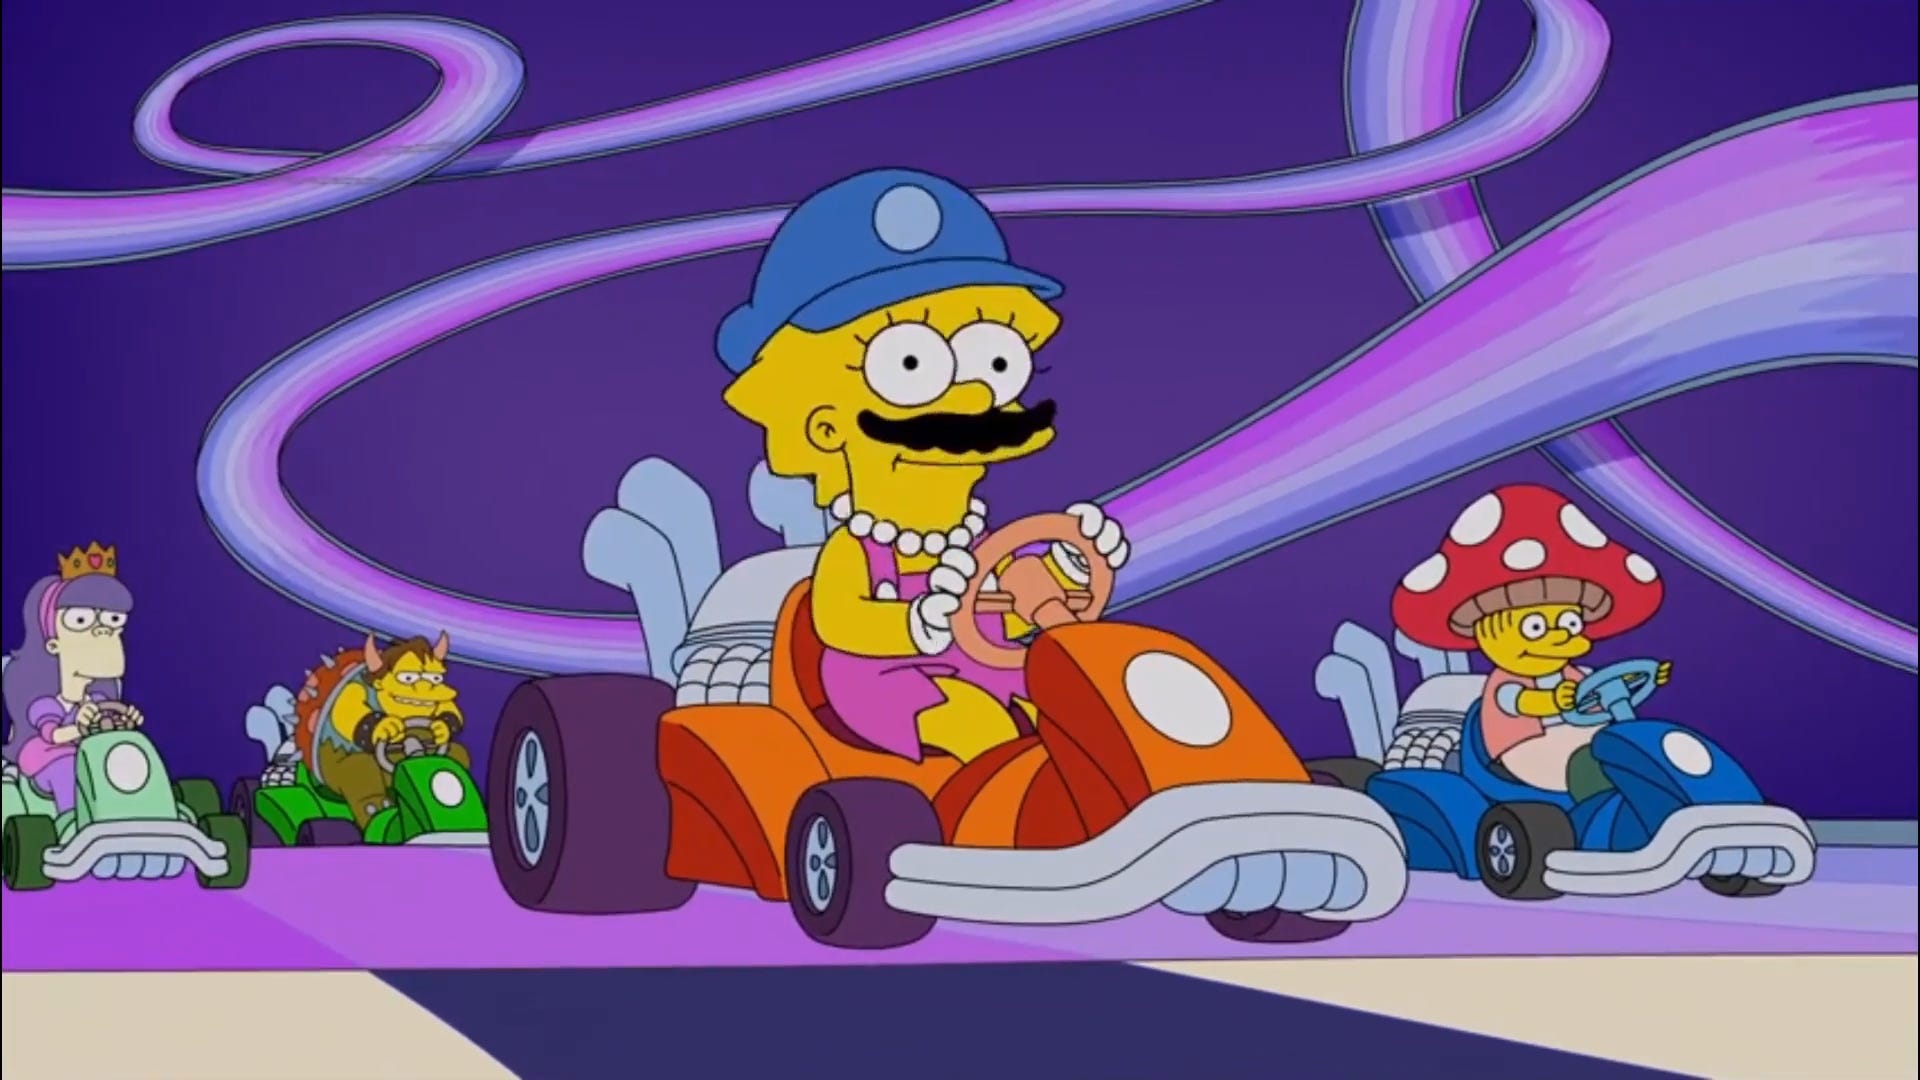 The Simpsons' Mario Kart parody is the closest we've got to a Hit & Run sequel